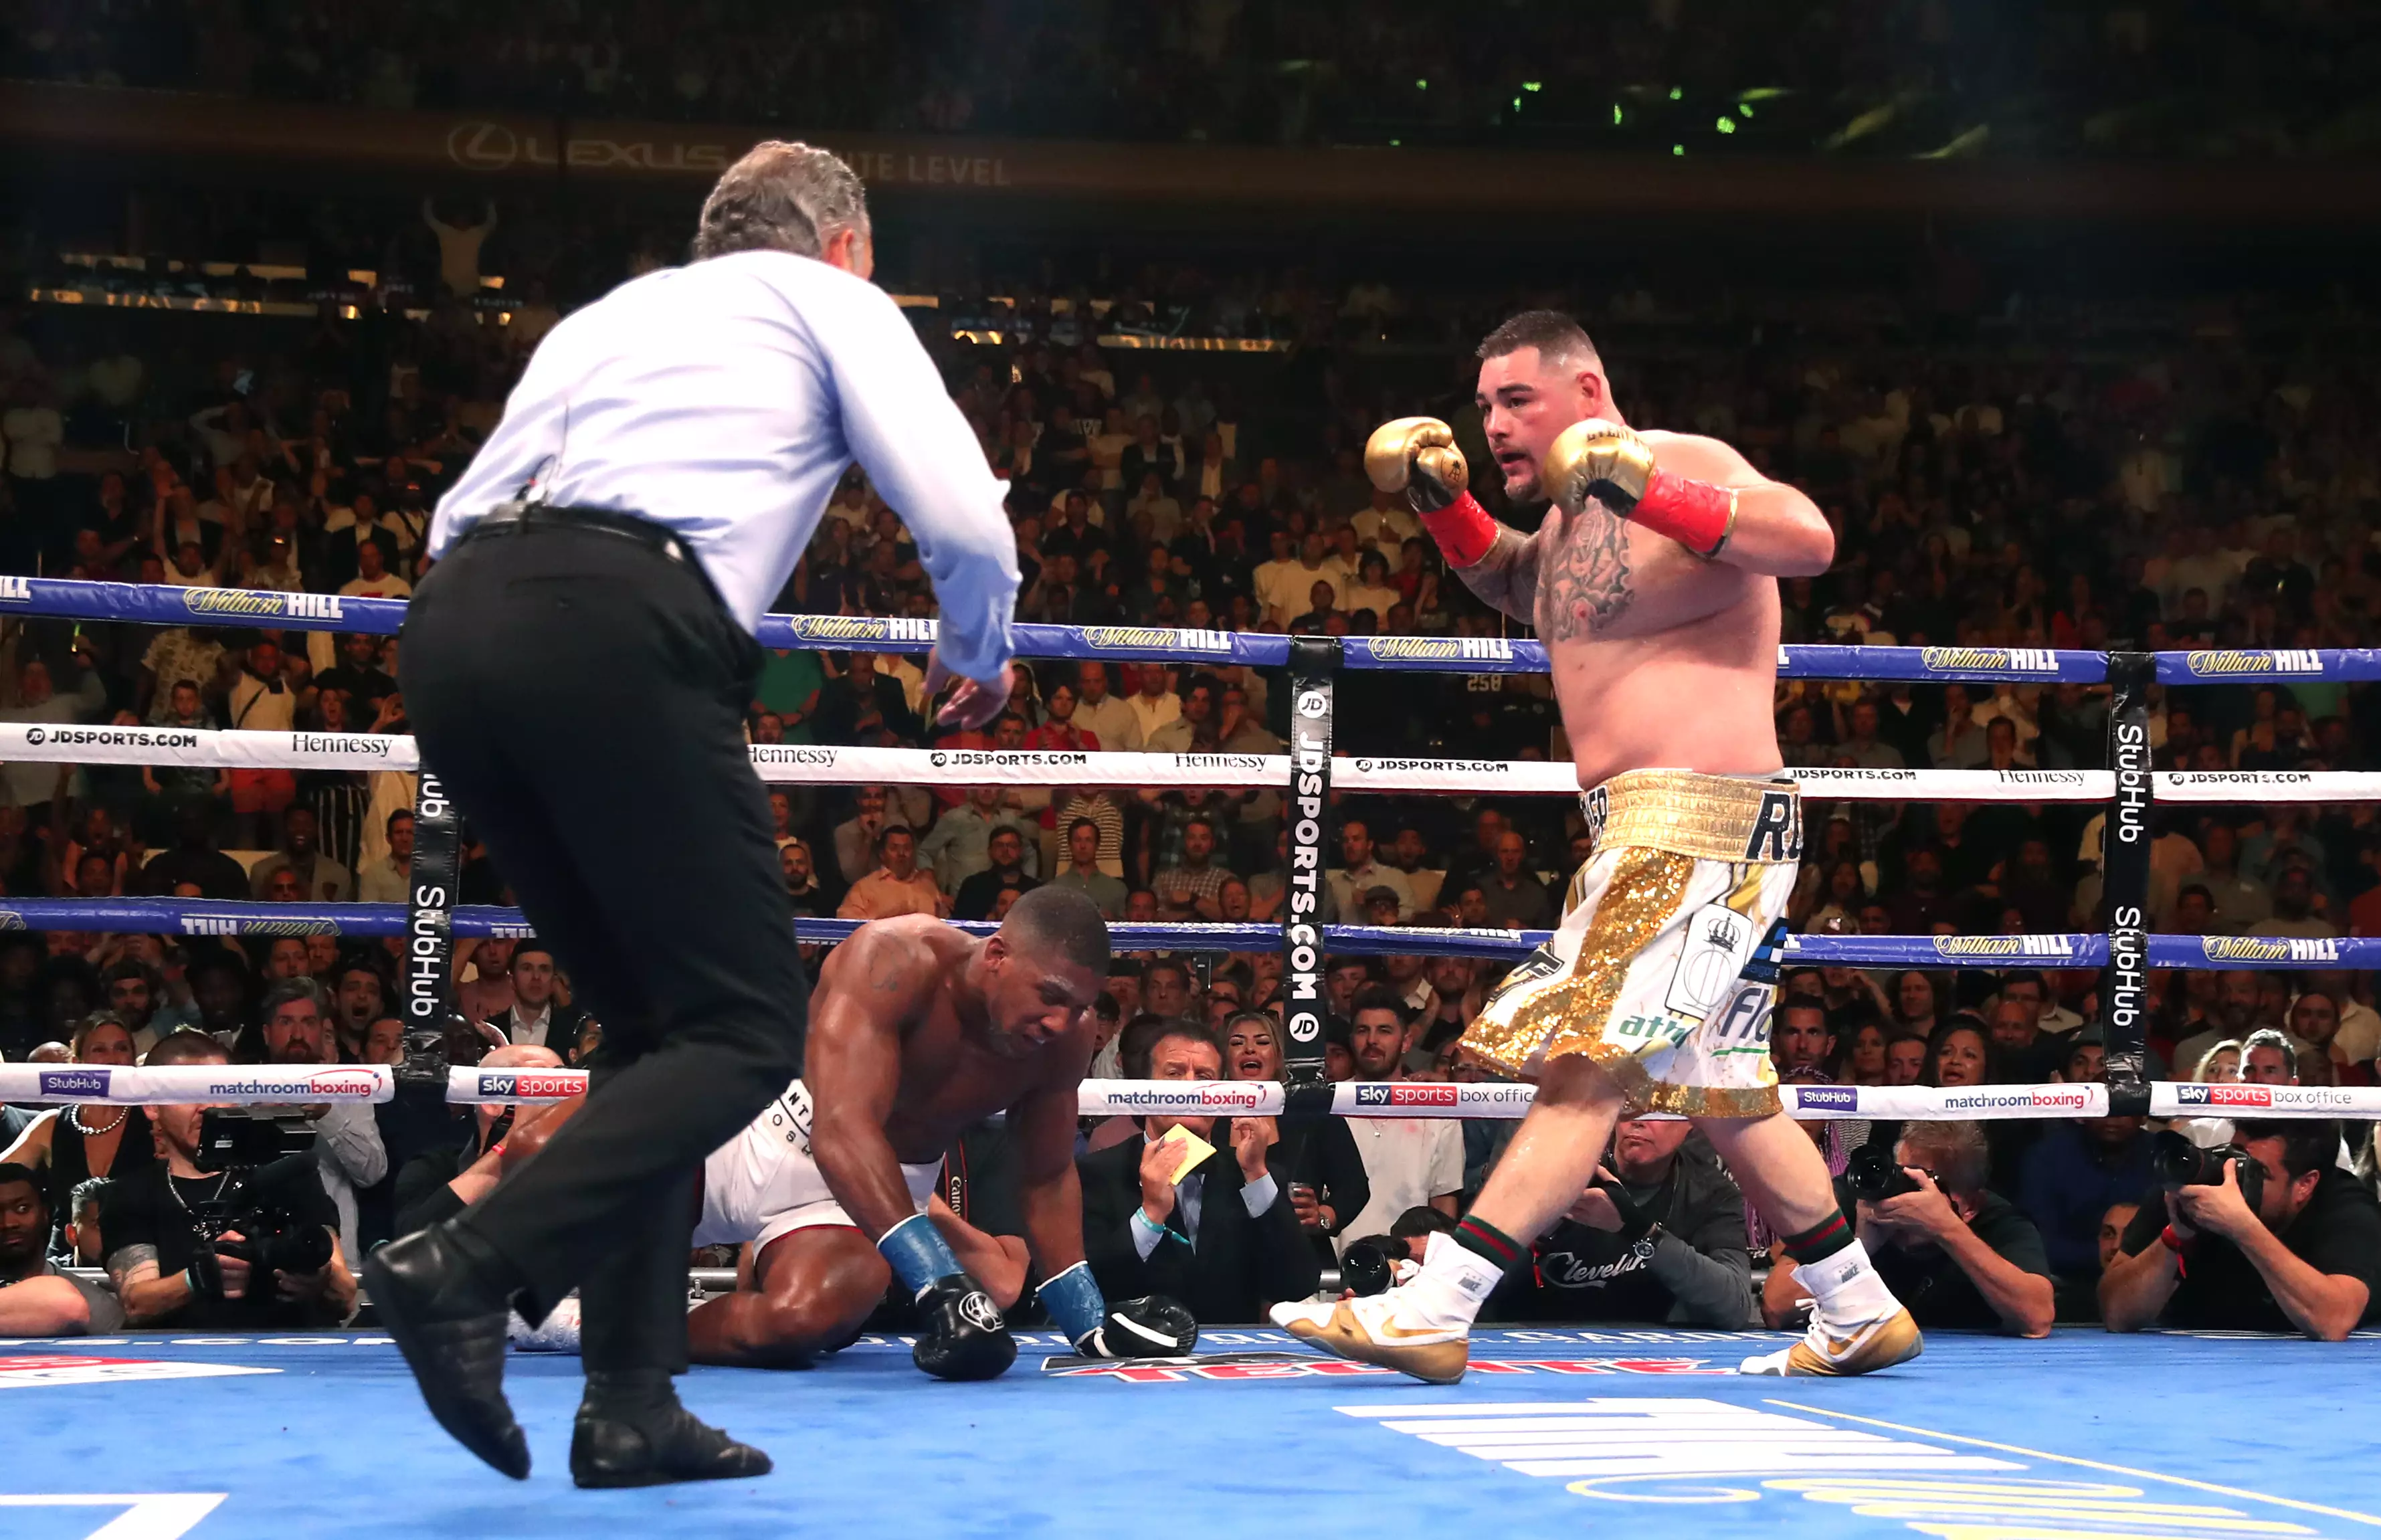 Andy Ruiz Jr knocked Anthony Joshua out in New York, and they'll meet in Saudi Arabia in their rematch